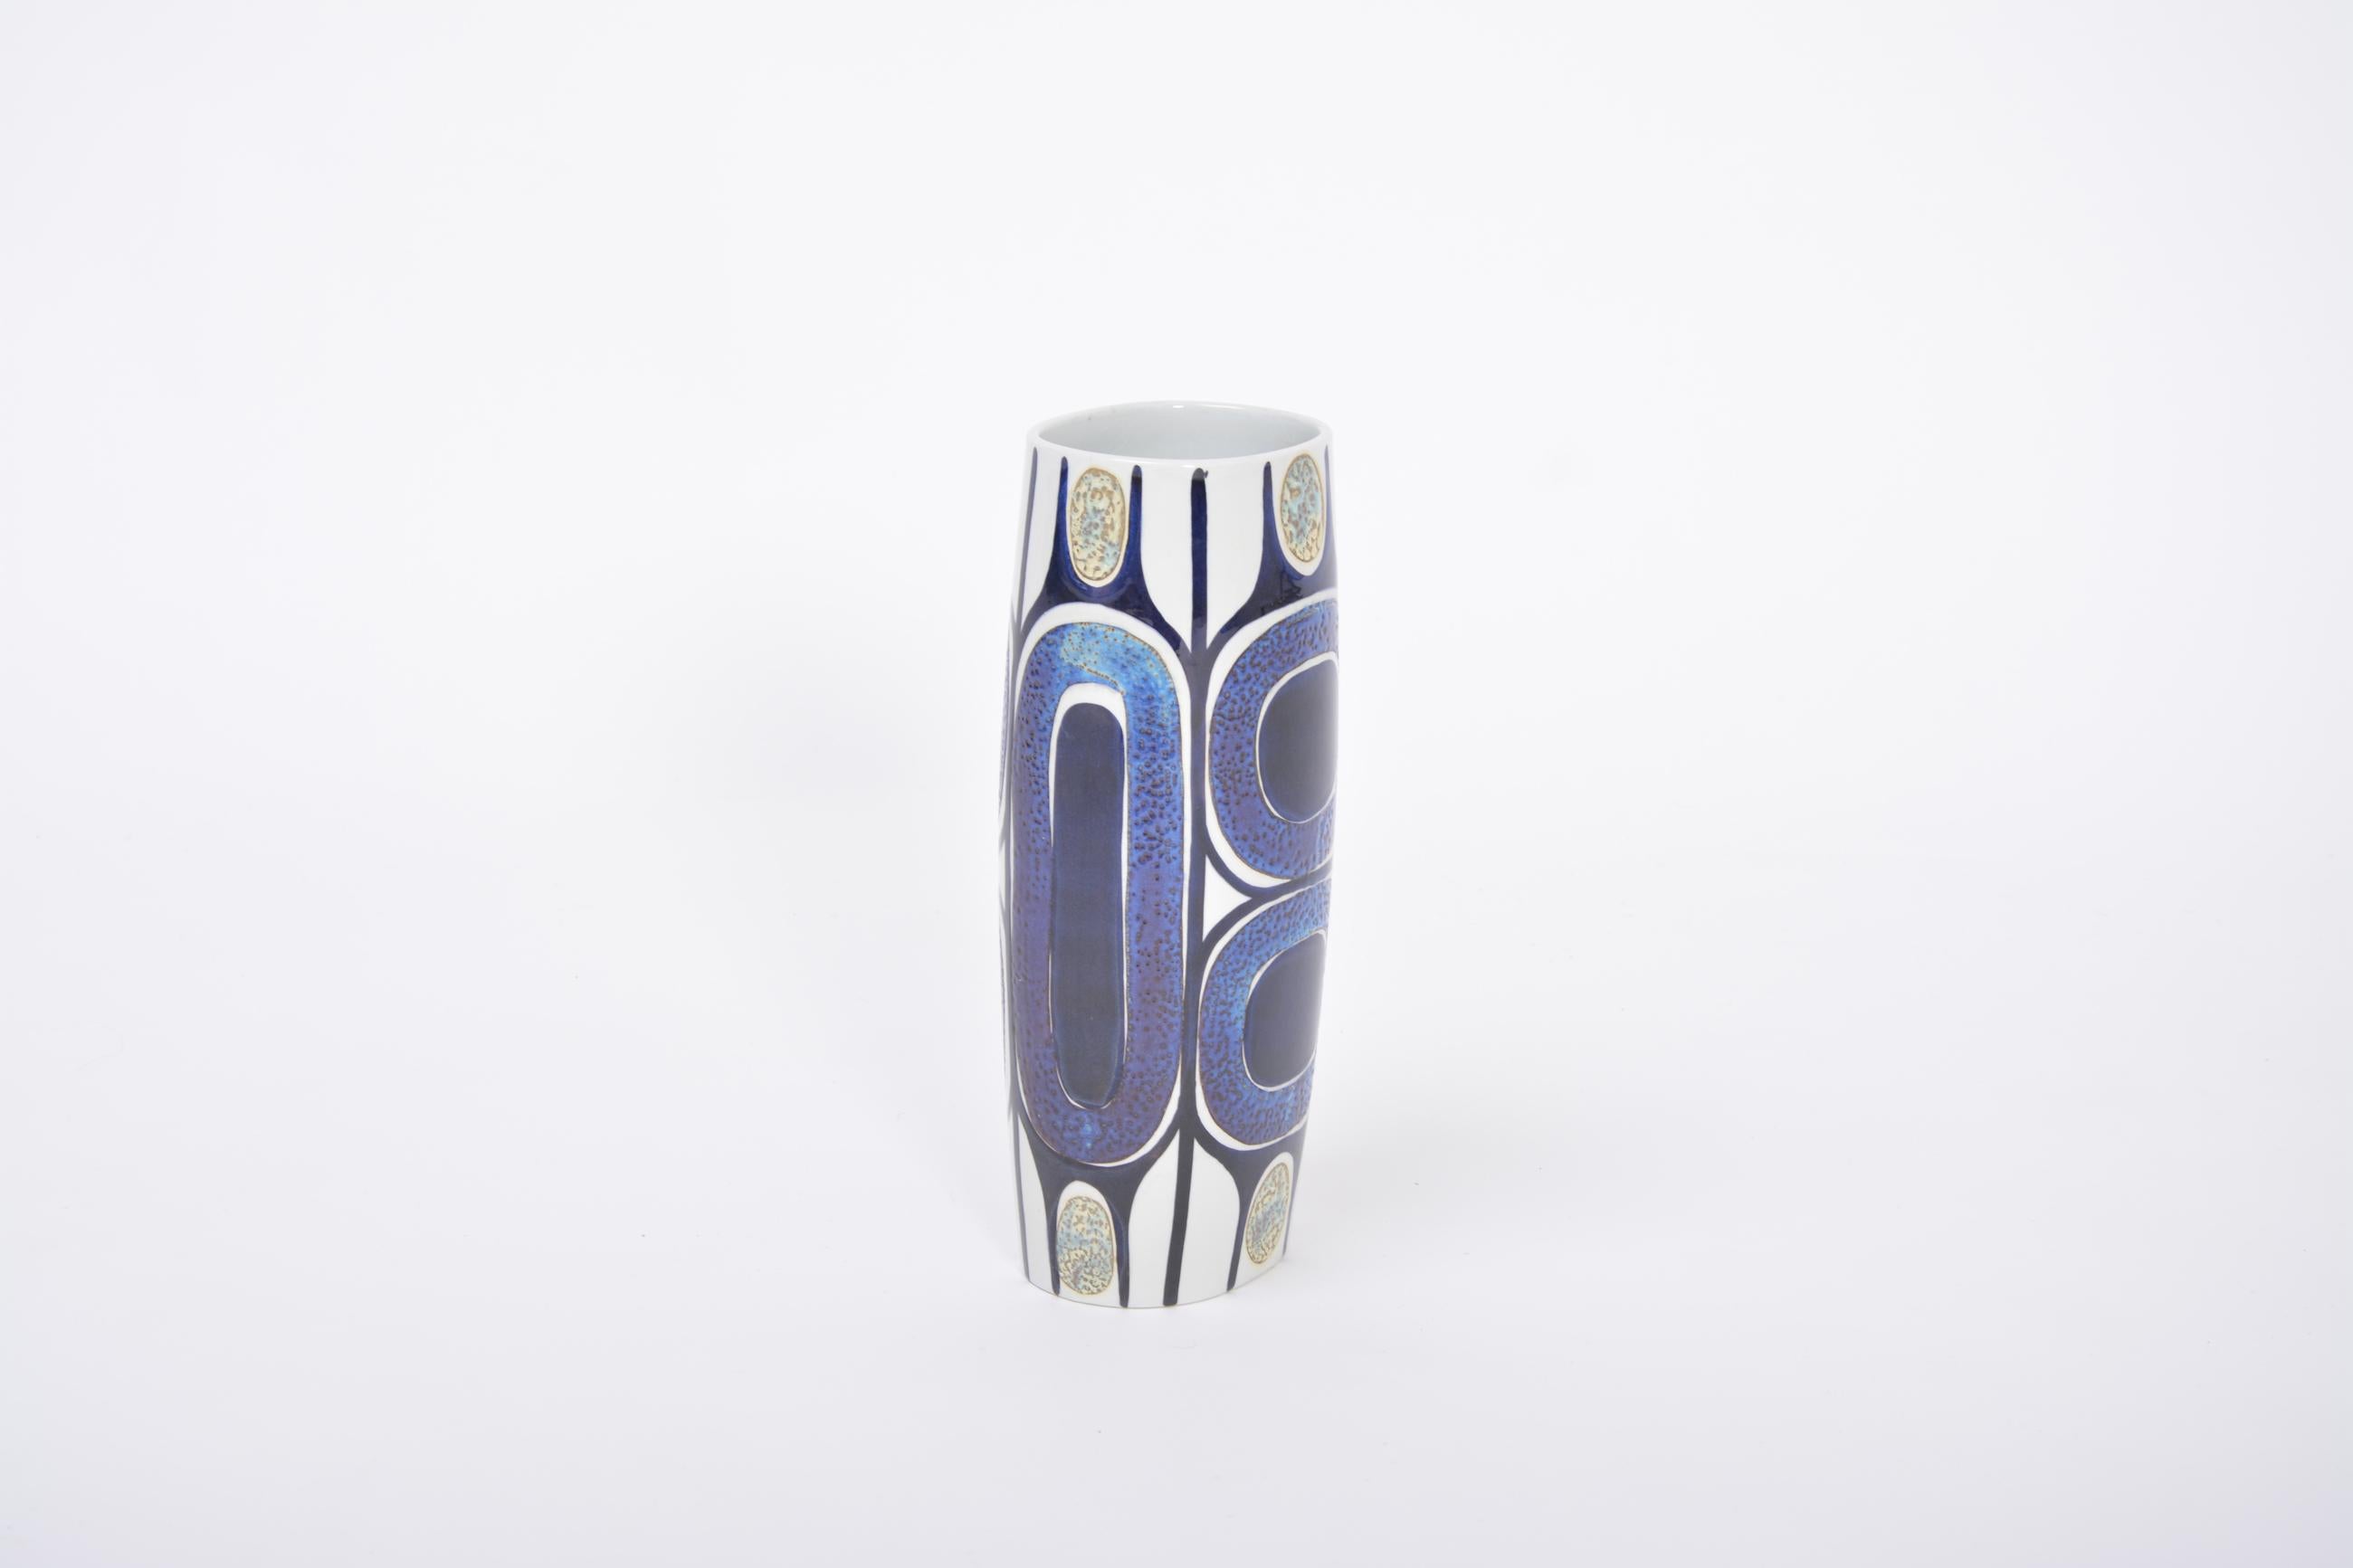 Tall Danish Tenera mid-century vase by Inge-Lise Koefoed for Royal Copenhagen 
Tall and eye-catching vase from the Royal Copenhagen Tenera series with gorgeous hand painted decor designed by Inge-Lise Koefoed.
The colors are blue and purple and